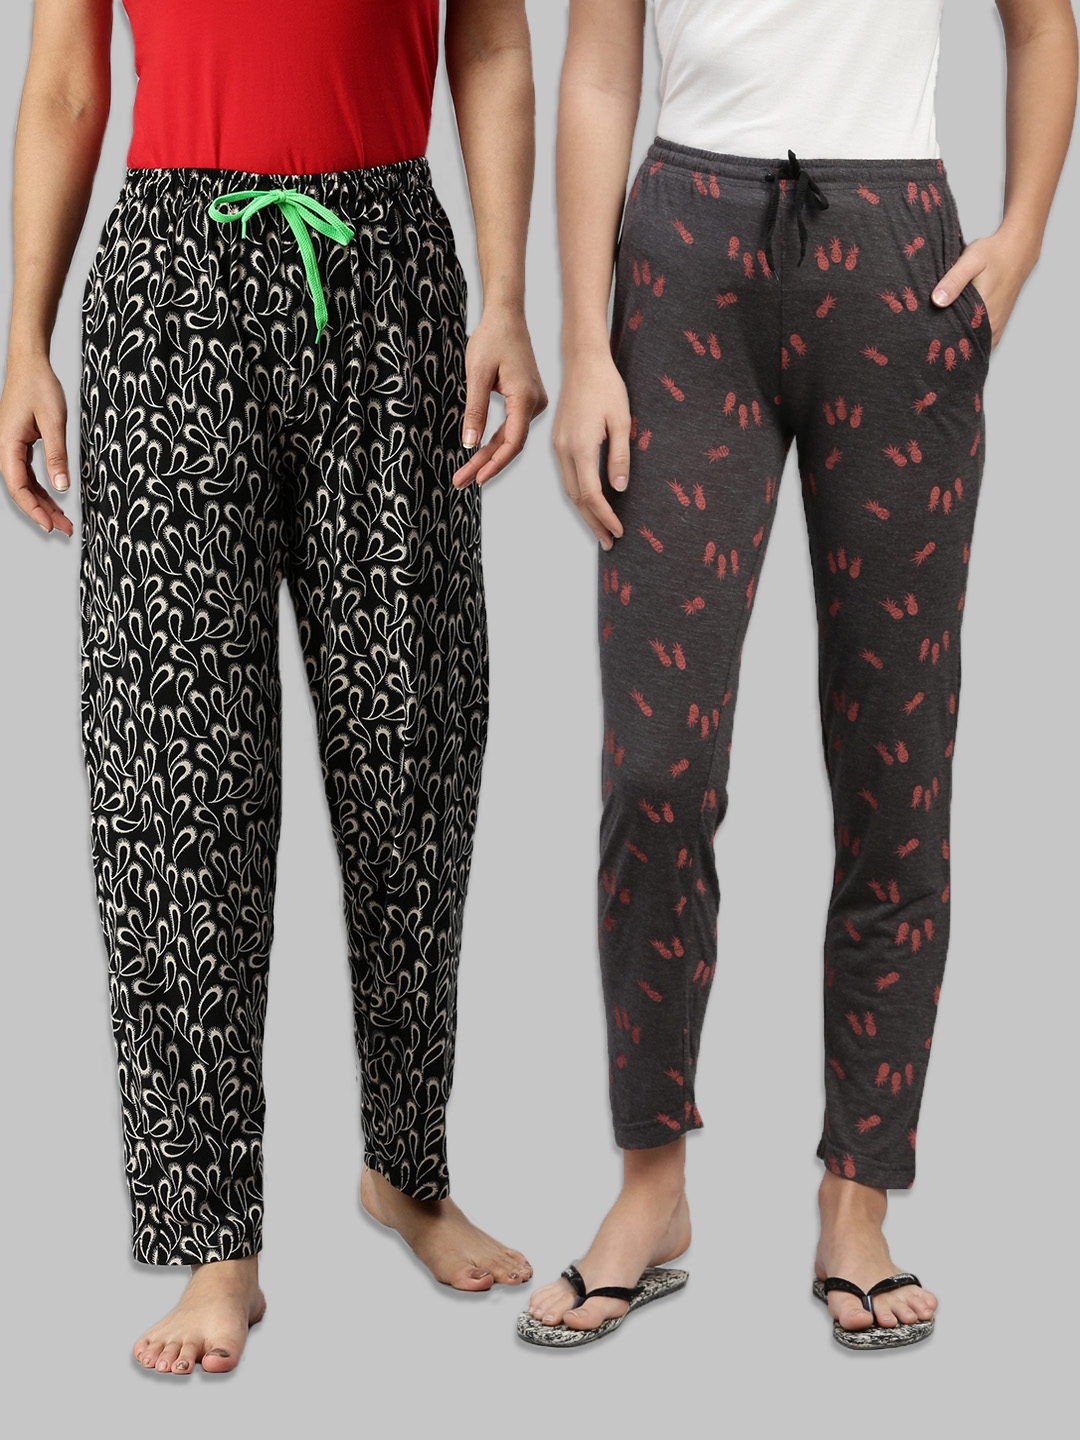 Kryptic | Kryptic Womens 100% Cotton Full Length Lounge Pants - Pack of 2